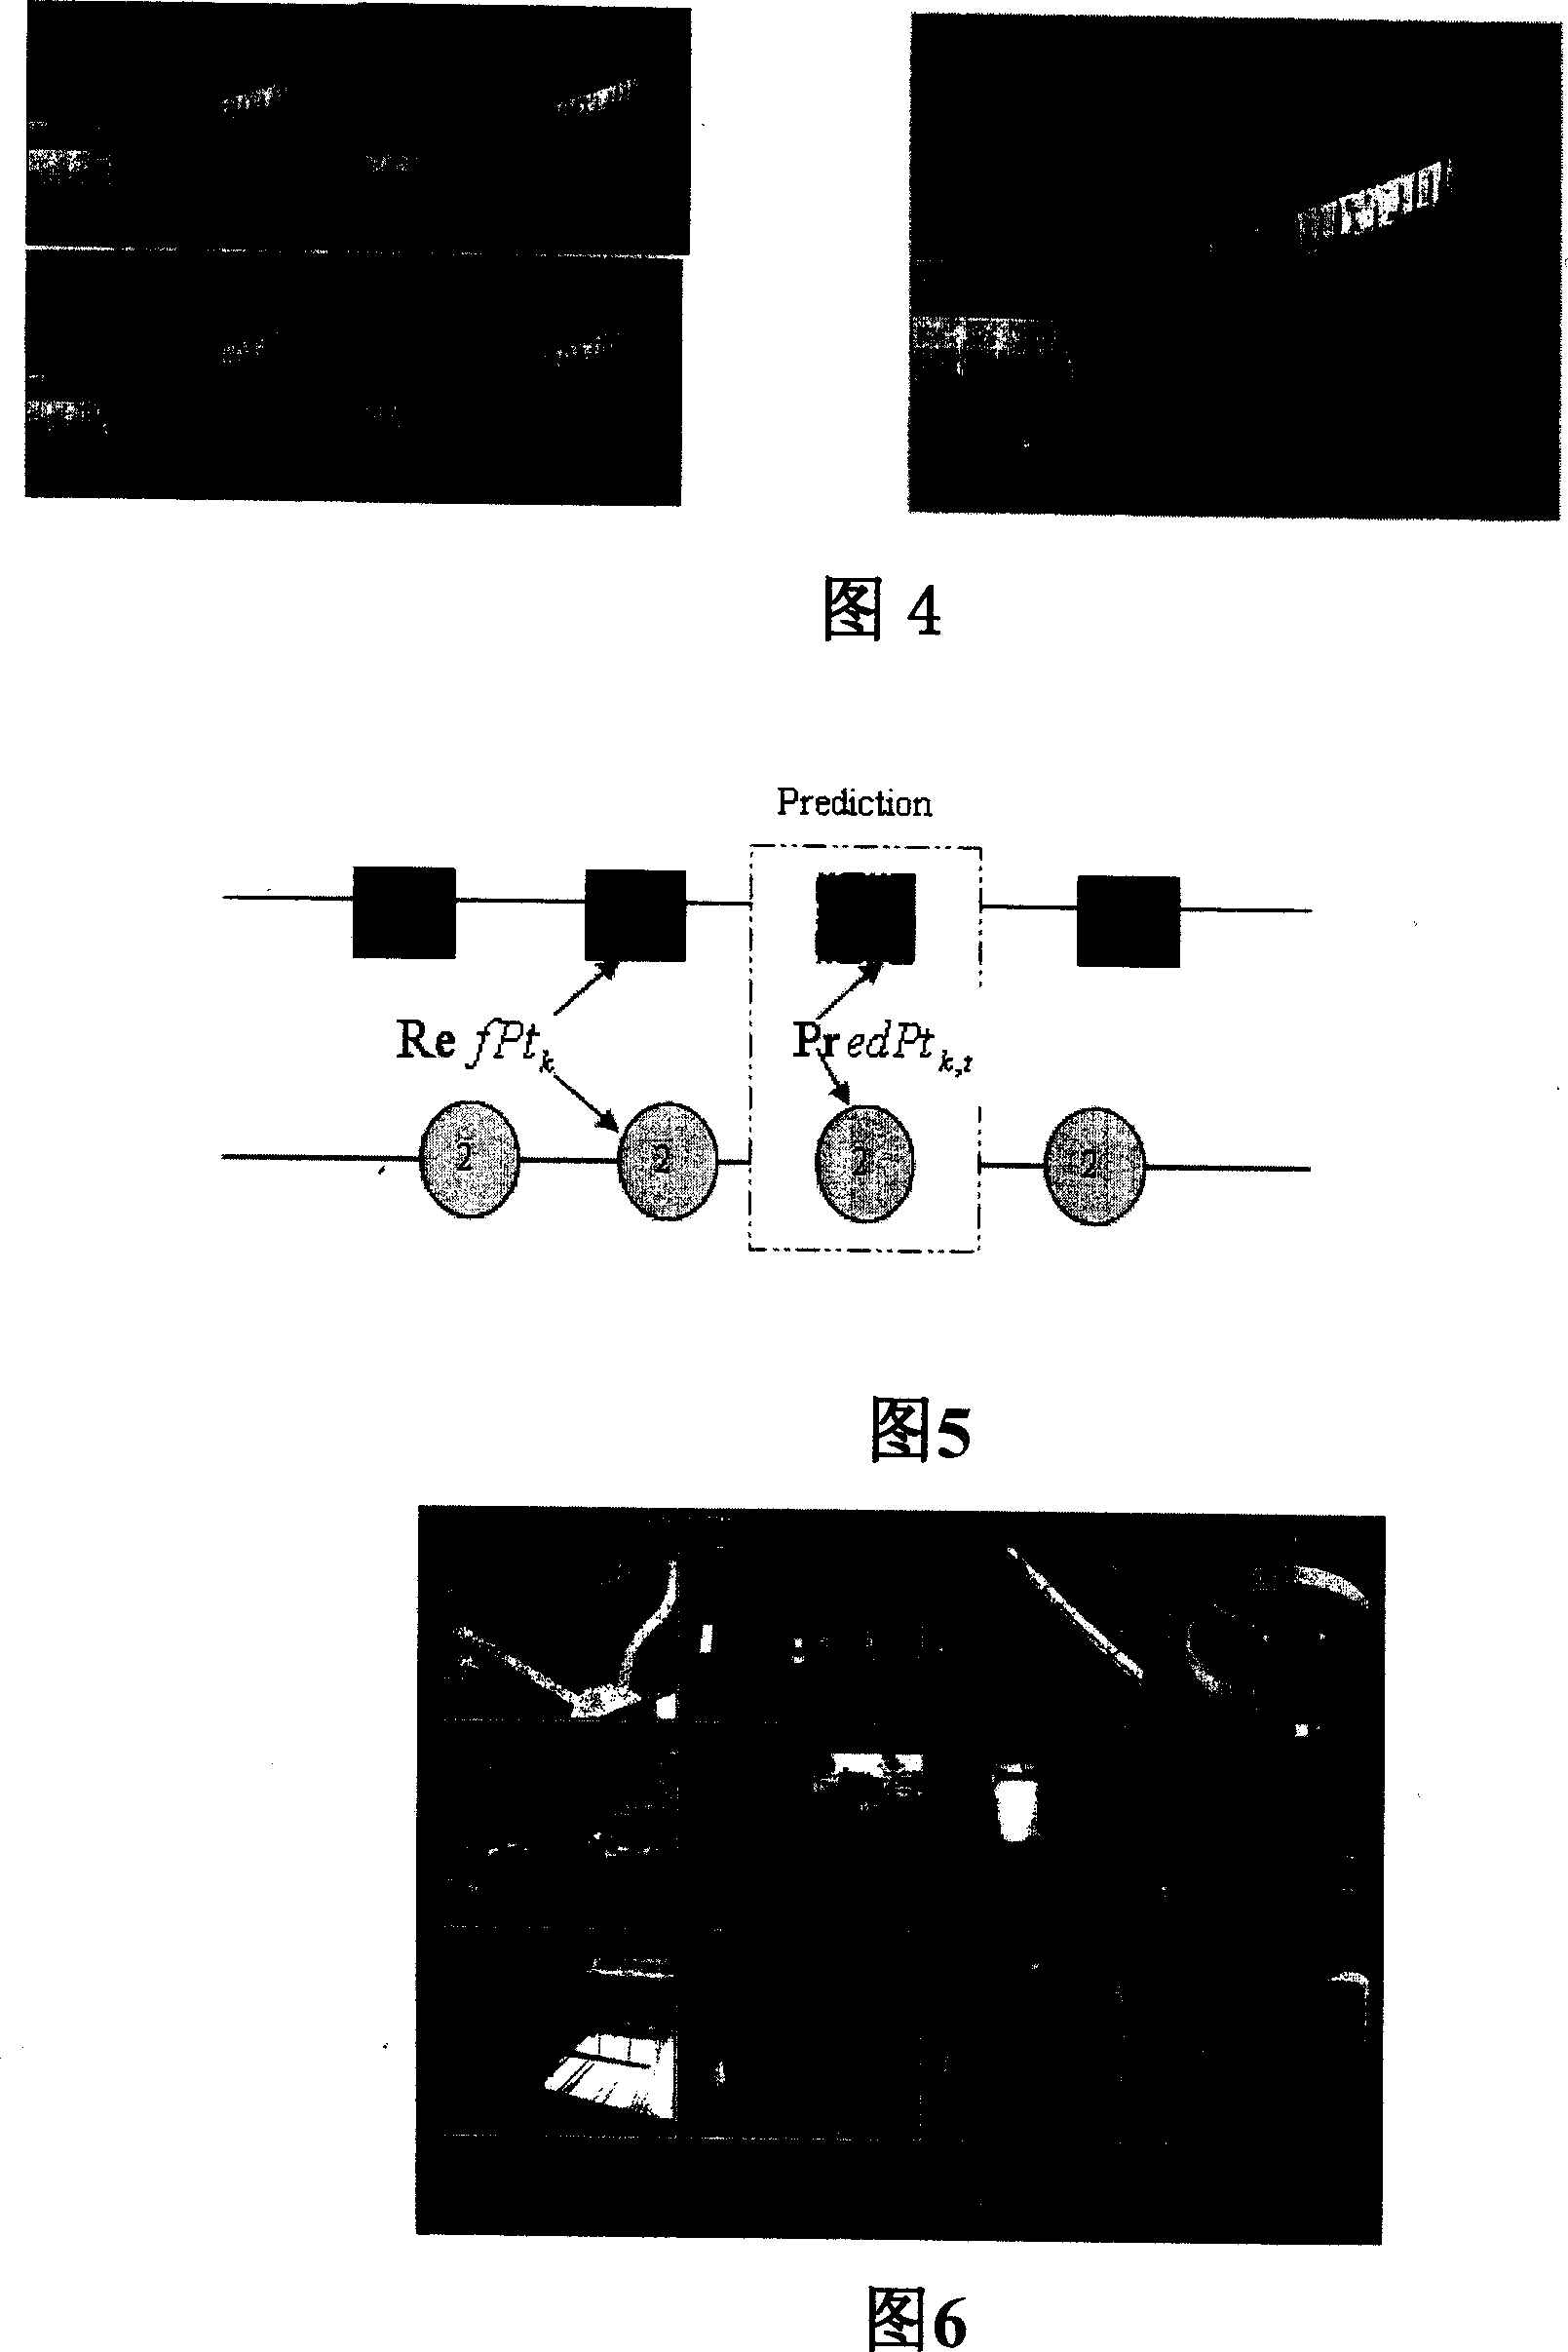 Night target detecting and tracing method based on visual property